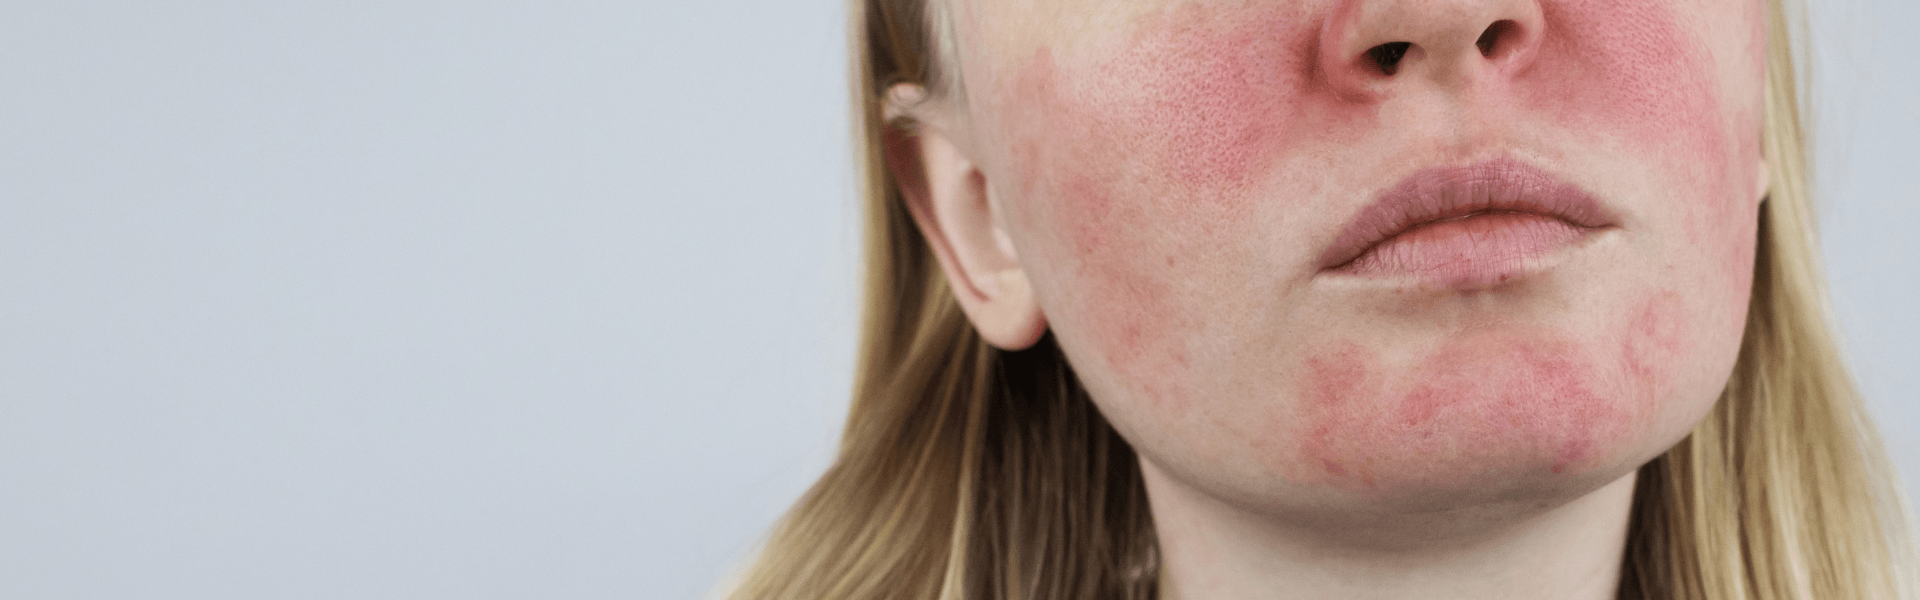 Red Spots On Skin: What's Causing Them?